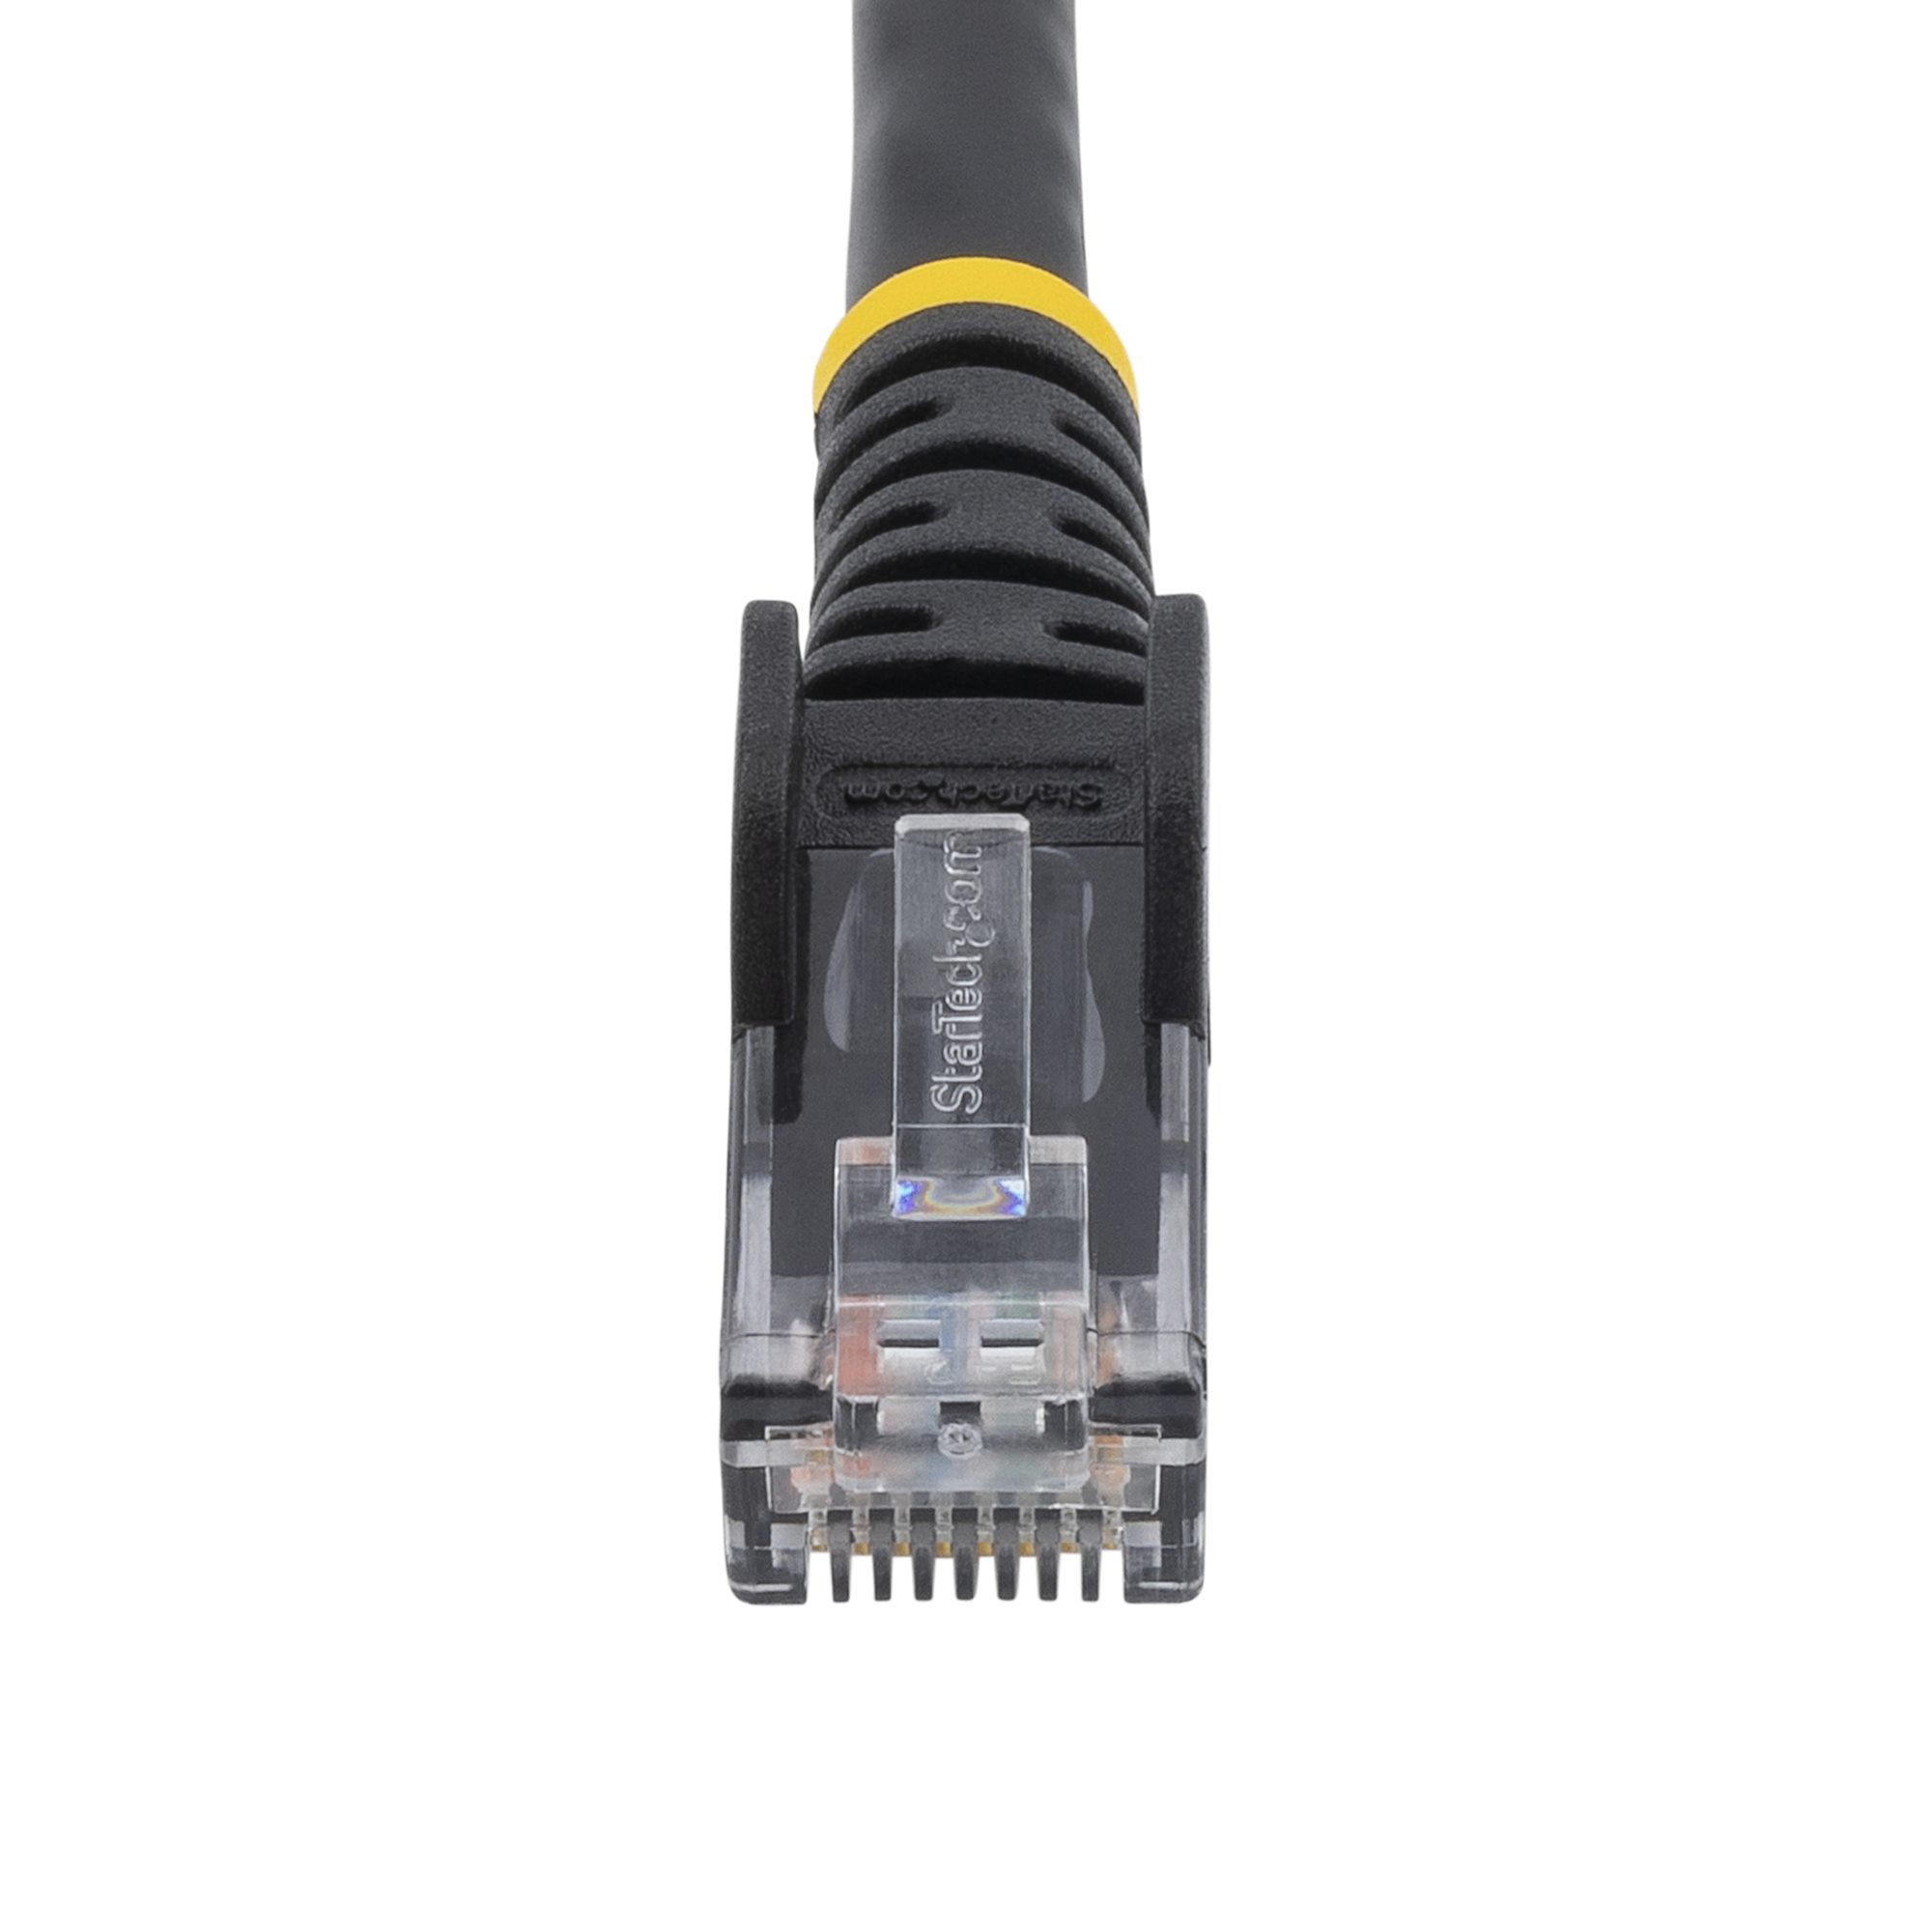 10M RJ45 Ethernet Cable Cat6 for PC Computer